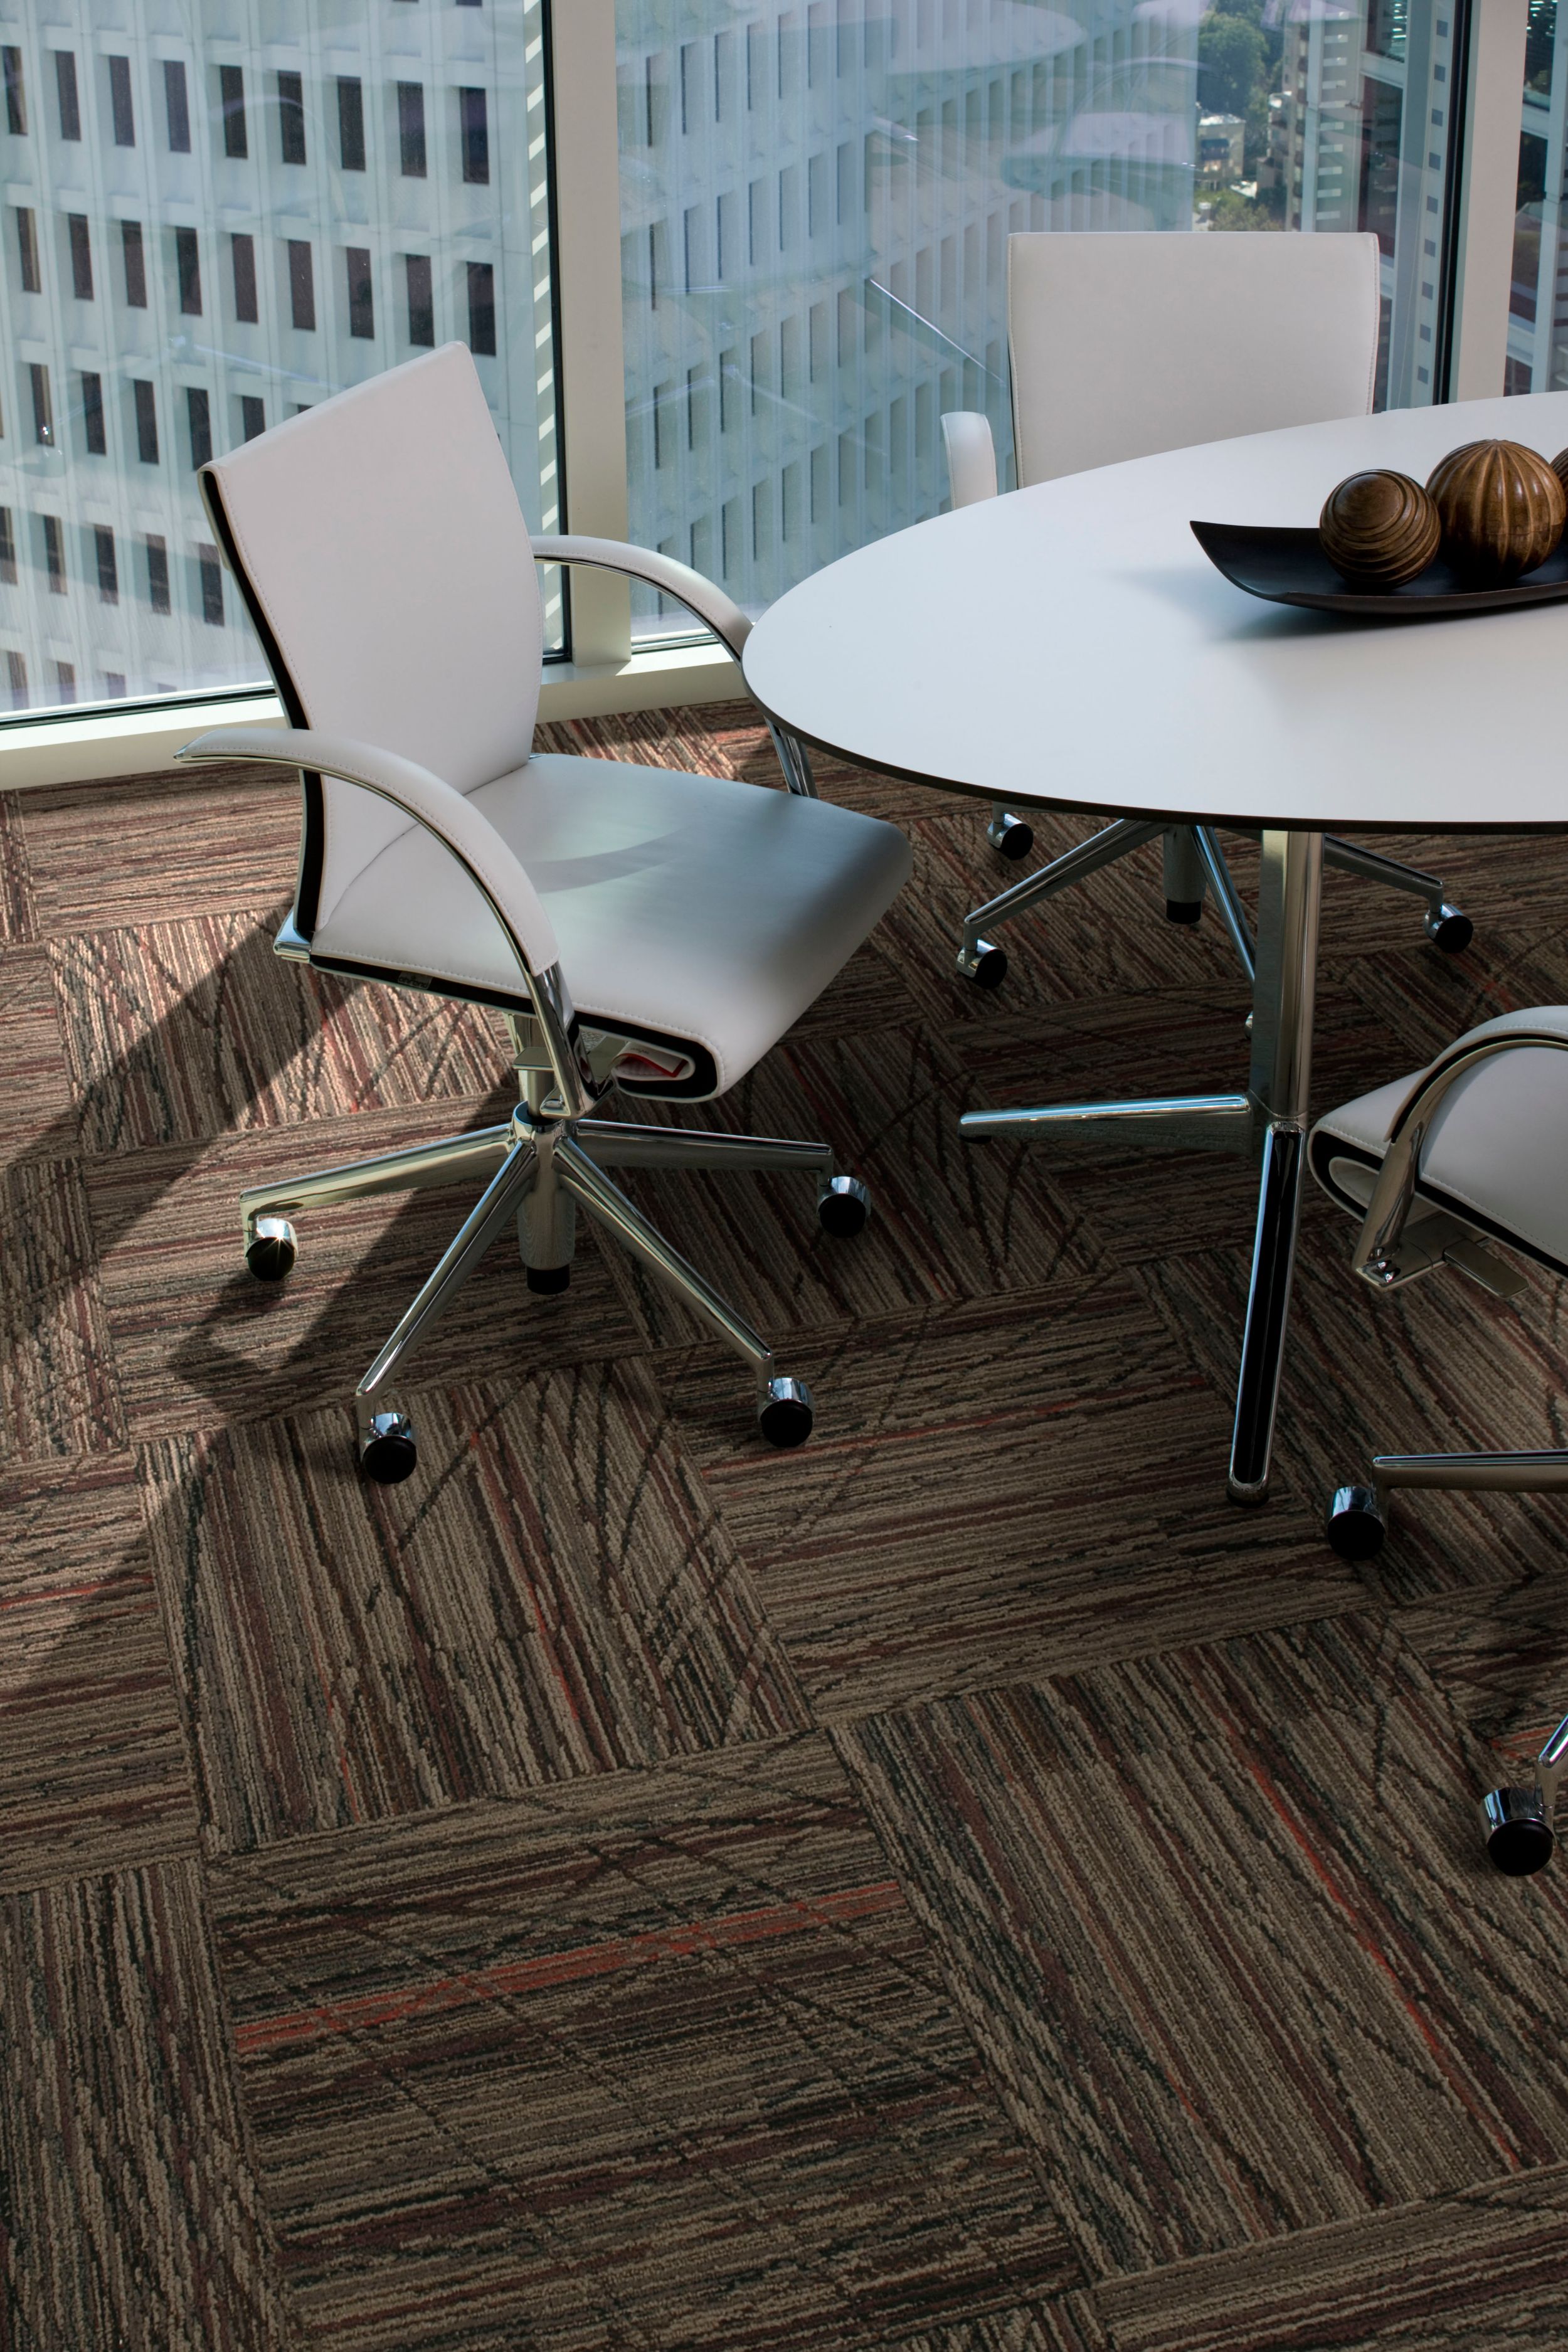 Detail of Interface Prairie Grass carpet tile in private office with table and chairs imagen número 7